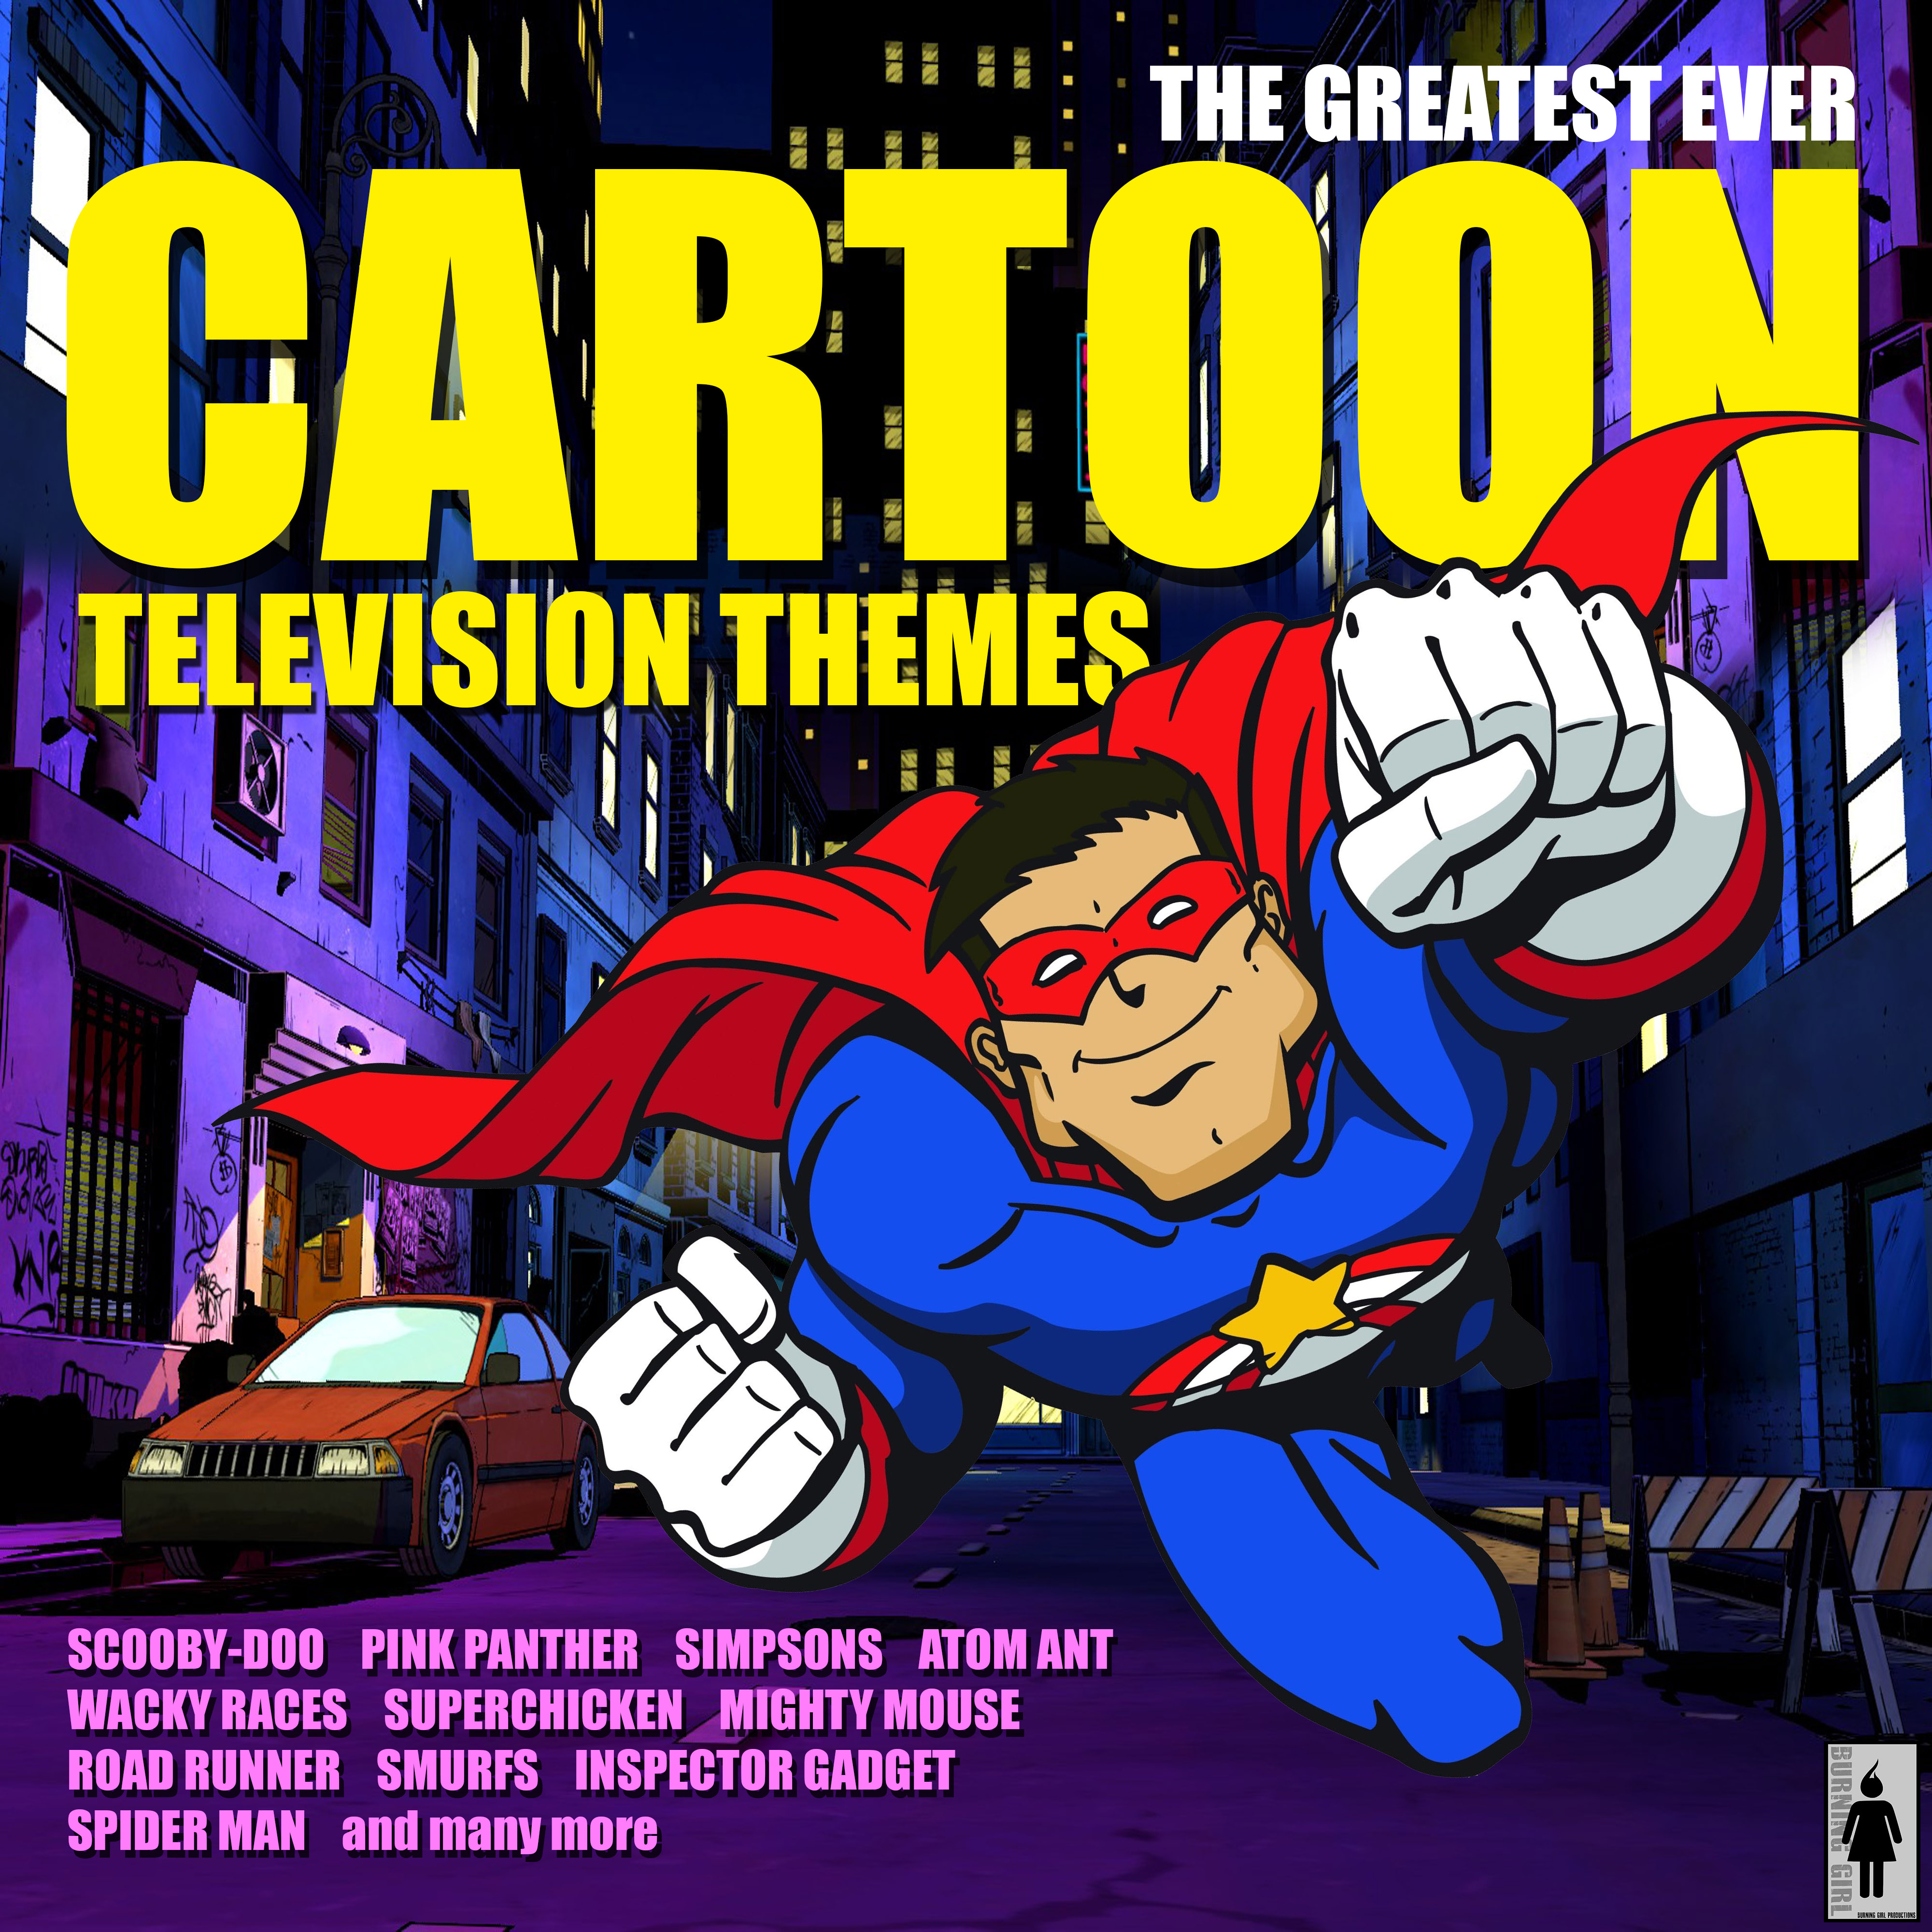 The Greatest Ever Cartoon Television Themes